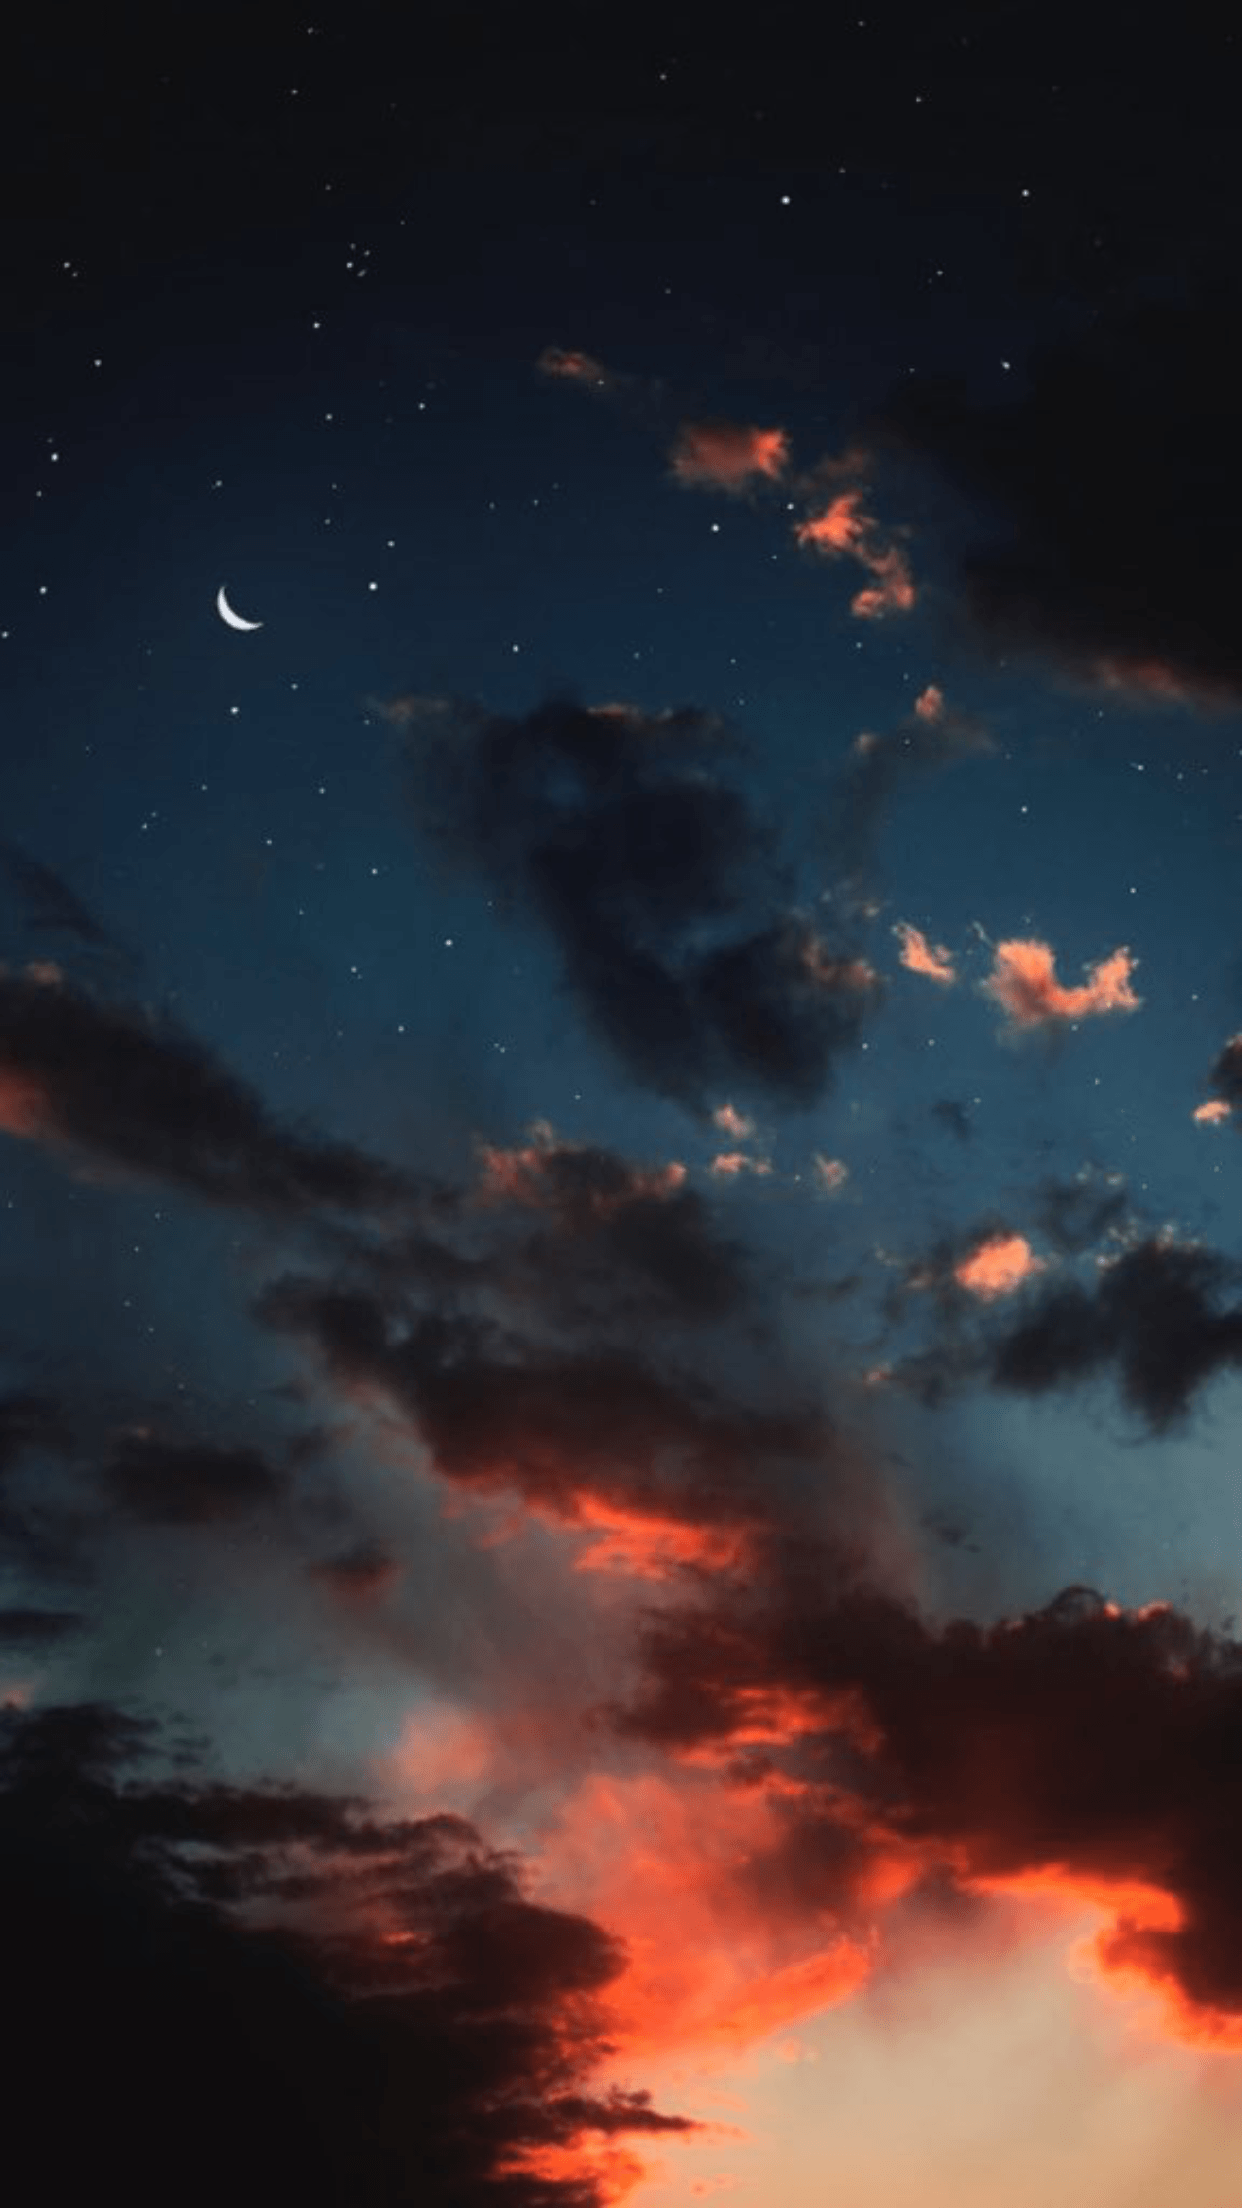 A night sky with a crescent moon and stars. - Sky, night